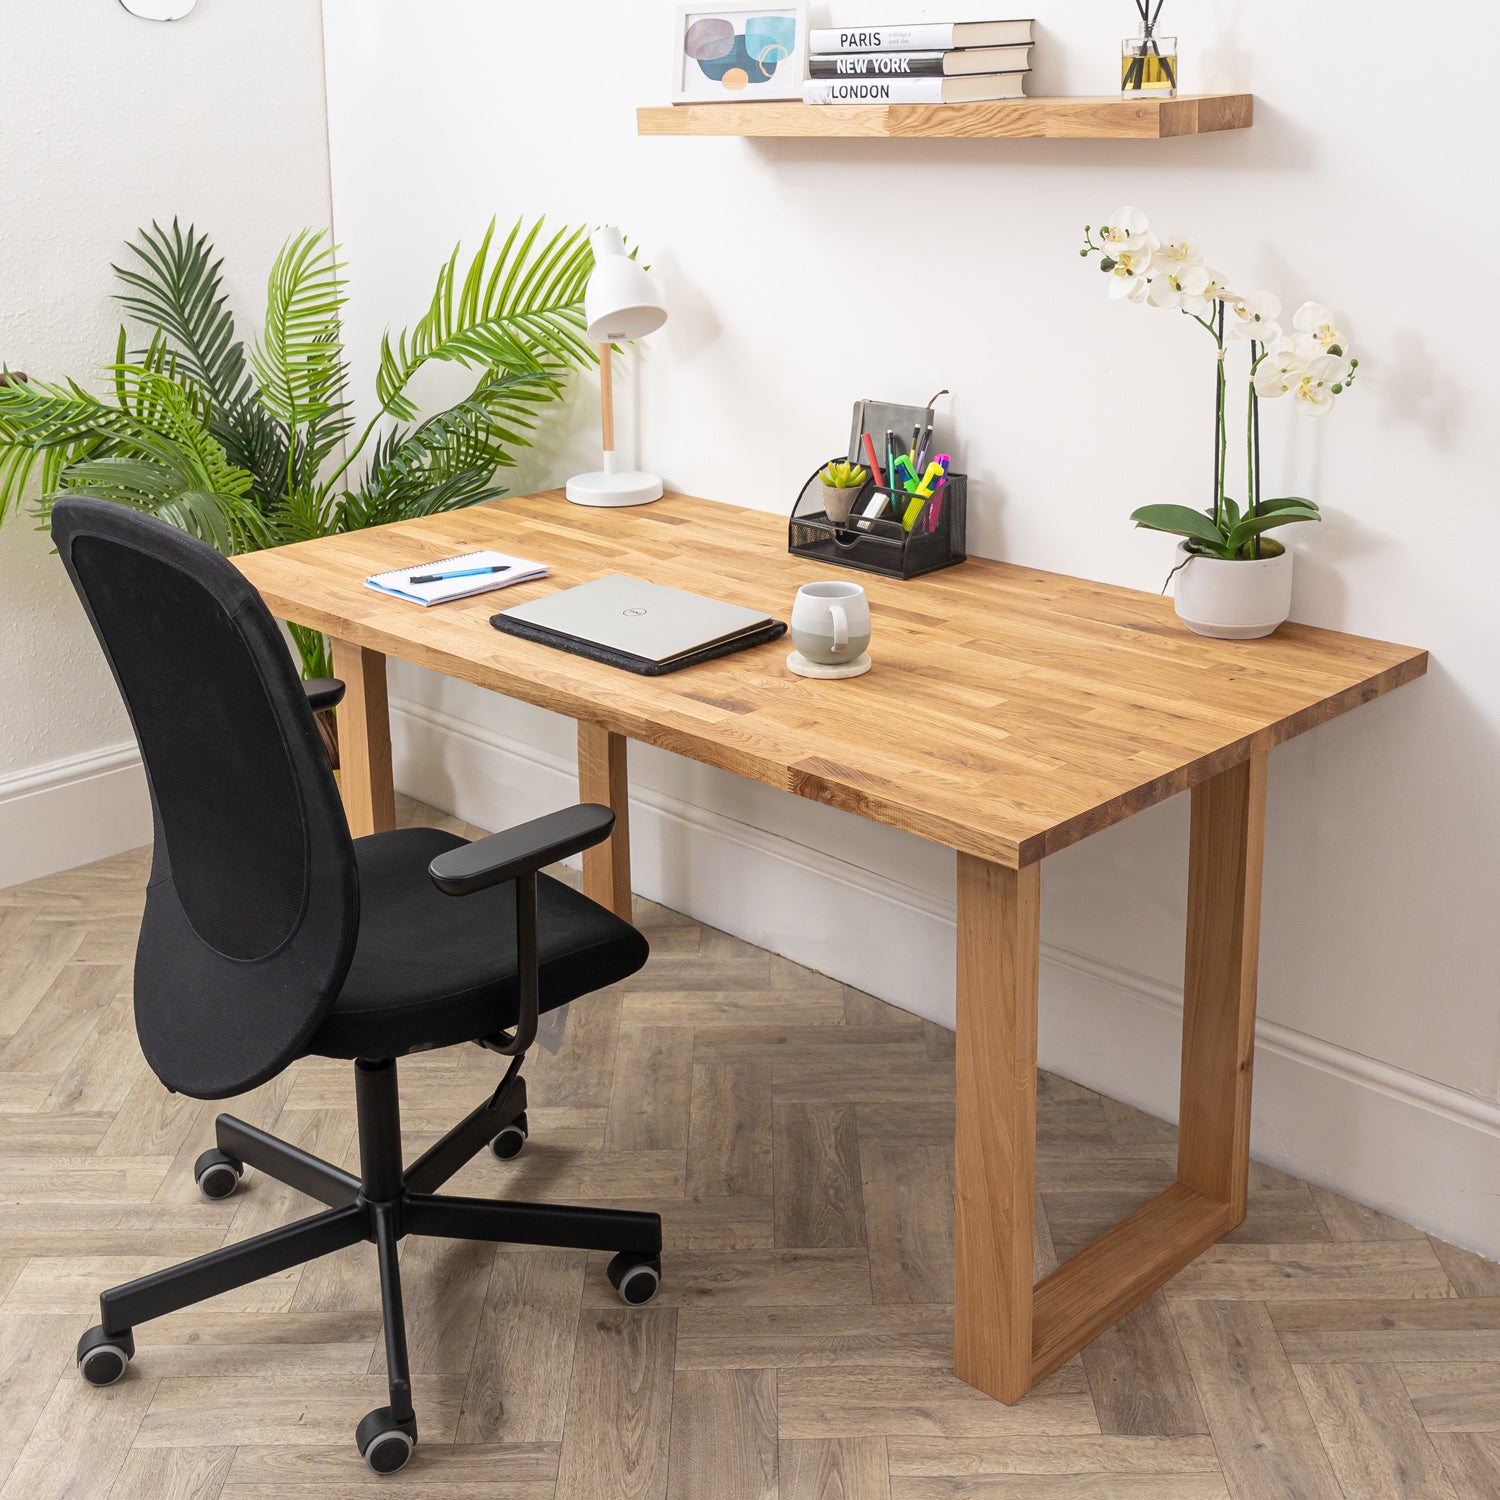 Oak Solid Wood Desk with Wooden Square Legs - 27mm thick desktop